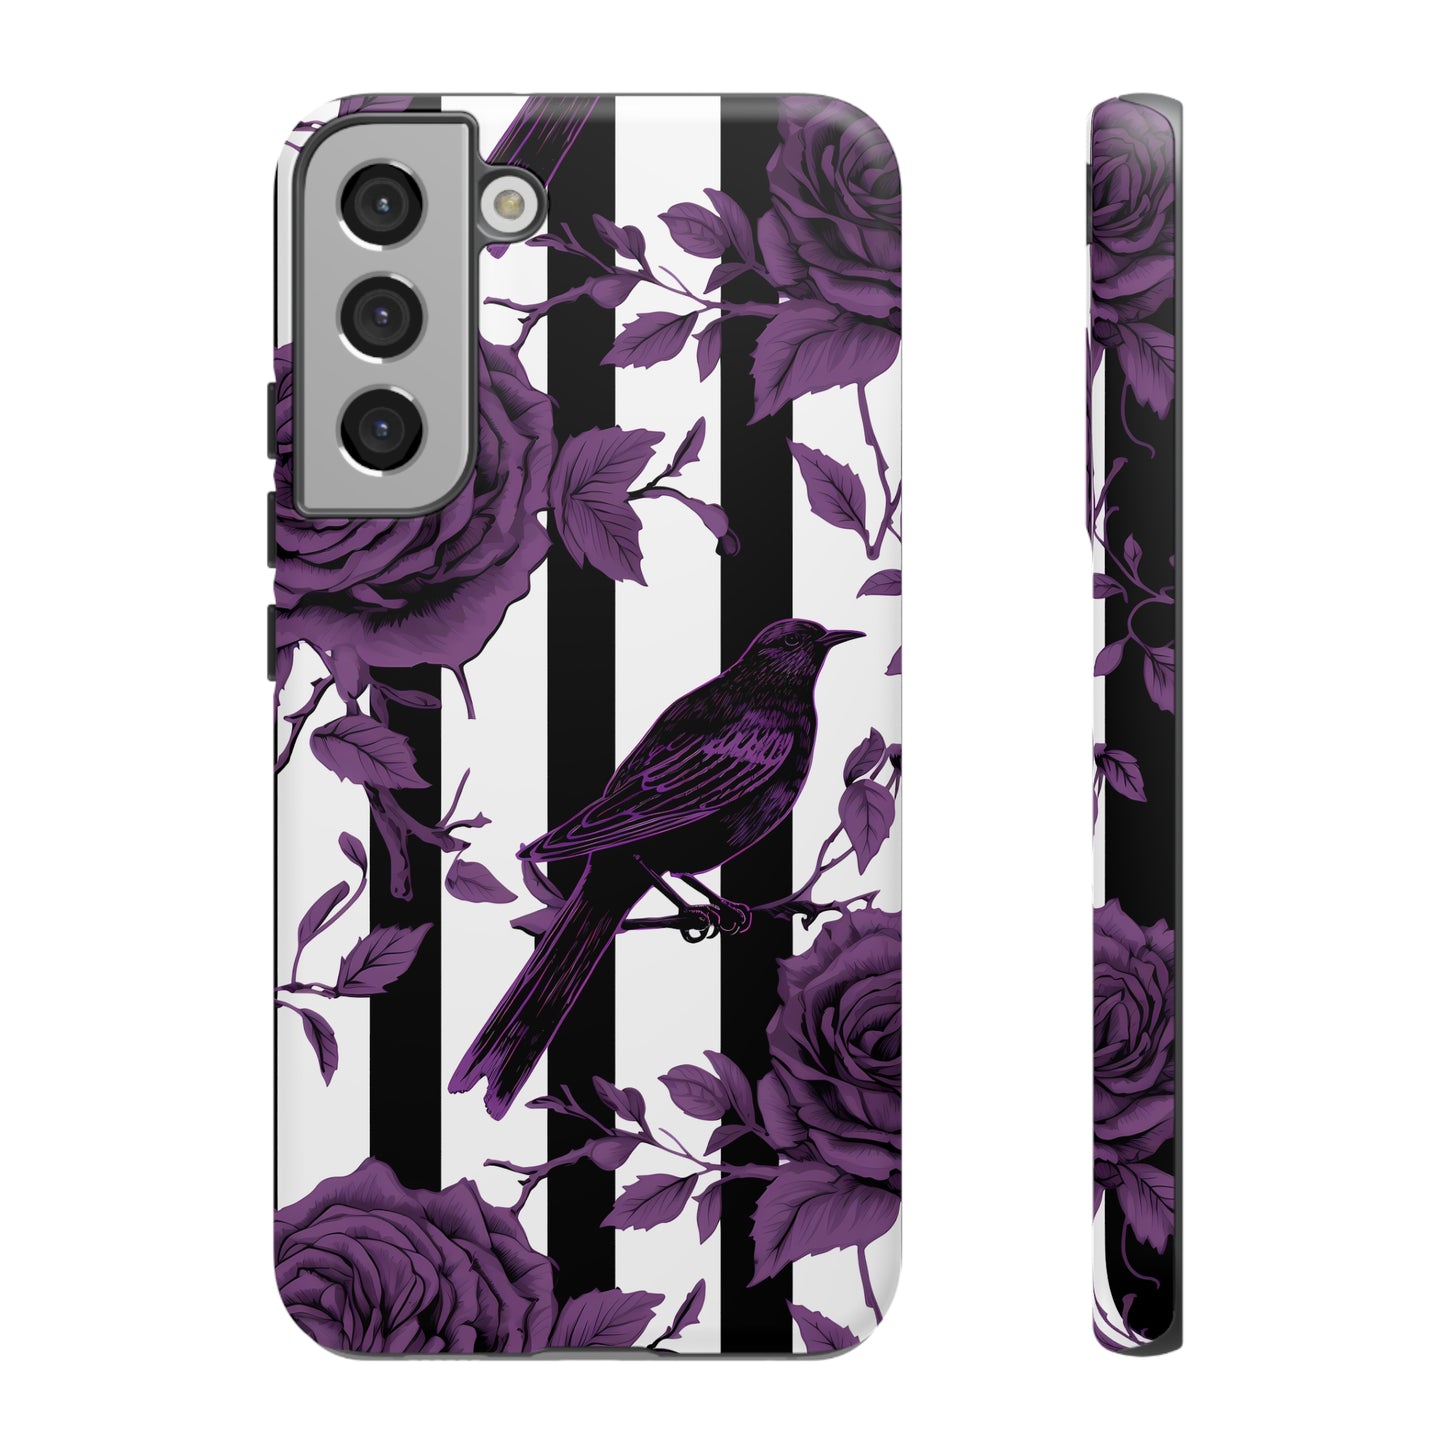 Striped Crows and Roses Tough Cases for iPhone Samsung Google PhonesPhone CaseVTZdesignsSamsung Galaxy S22 PlusMatteAccessoriescrowsGlossy